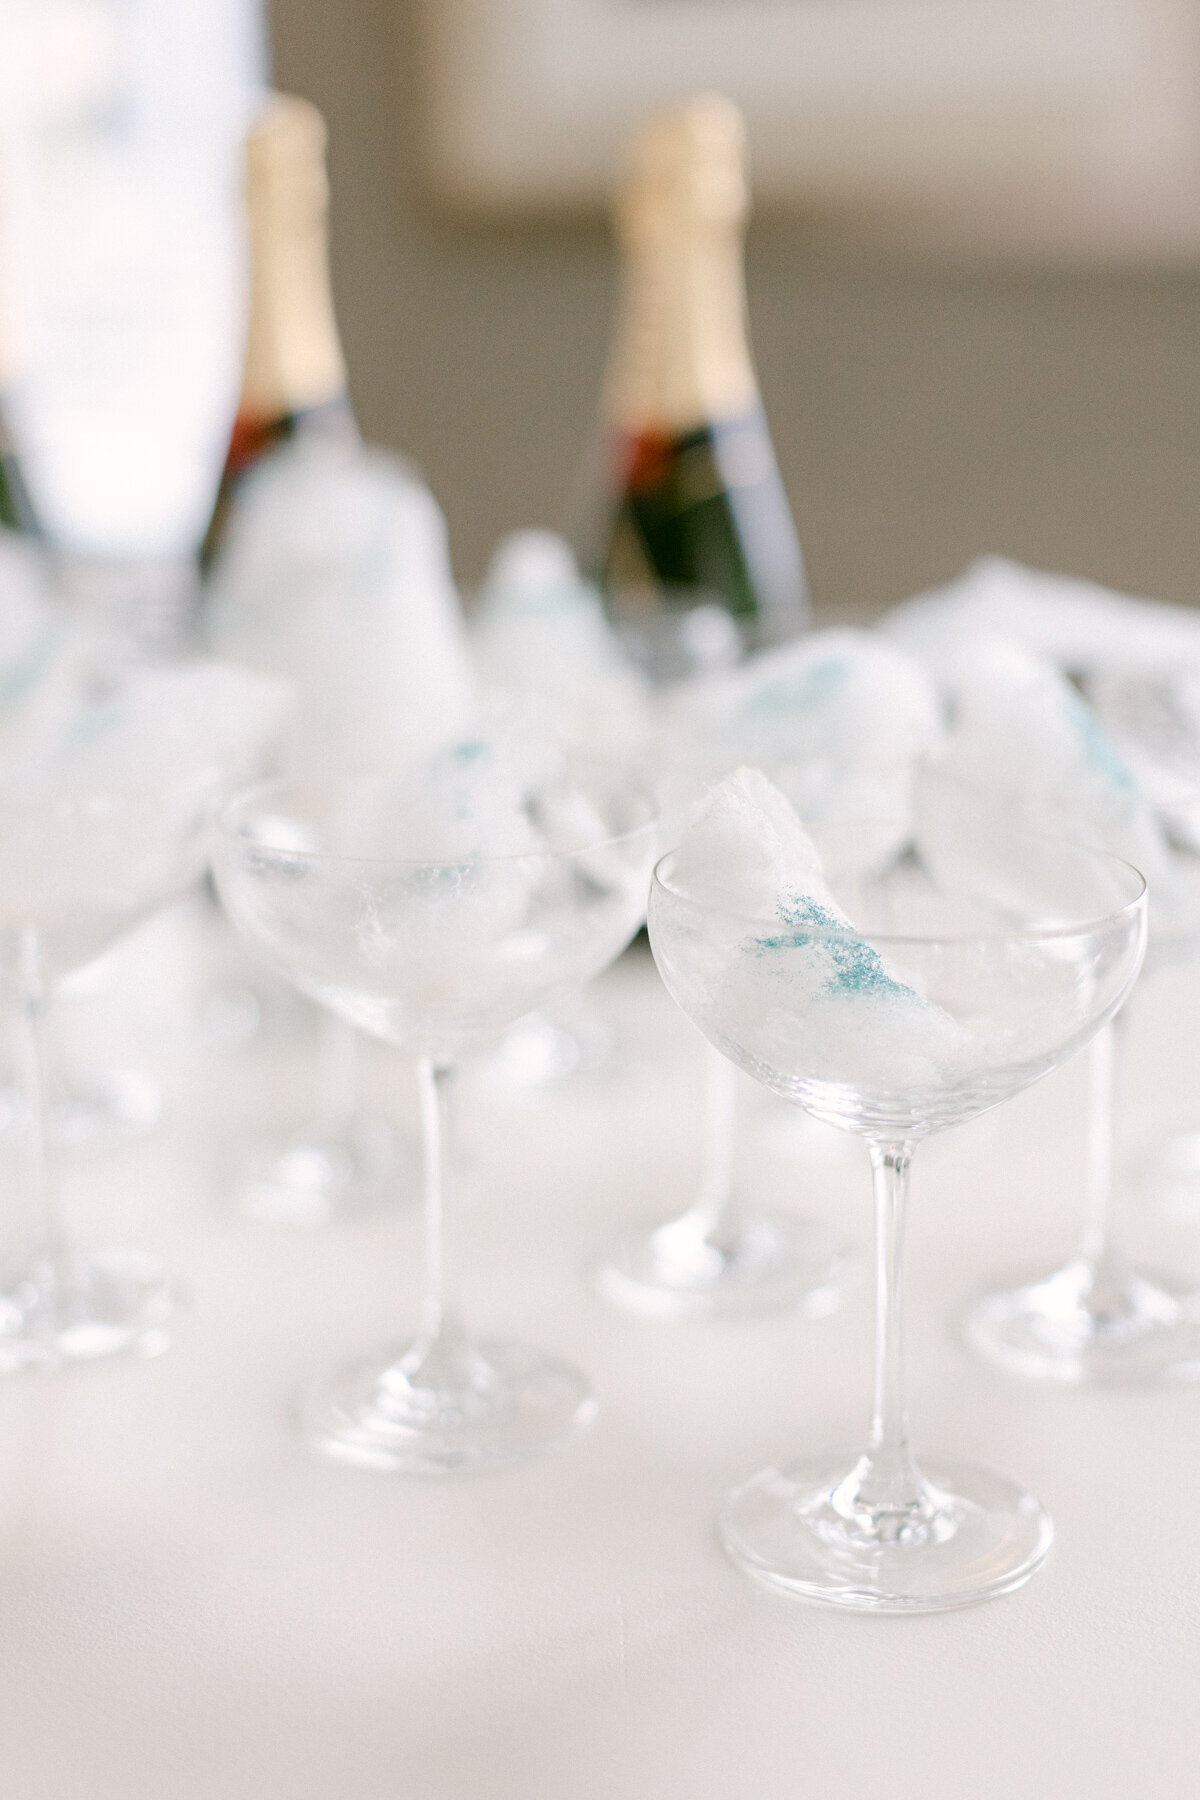 Martini Glasses TTWD NYC Party Planner